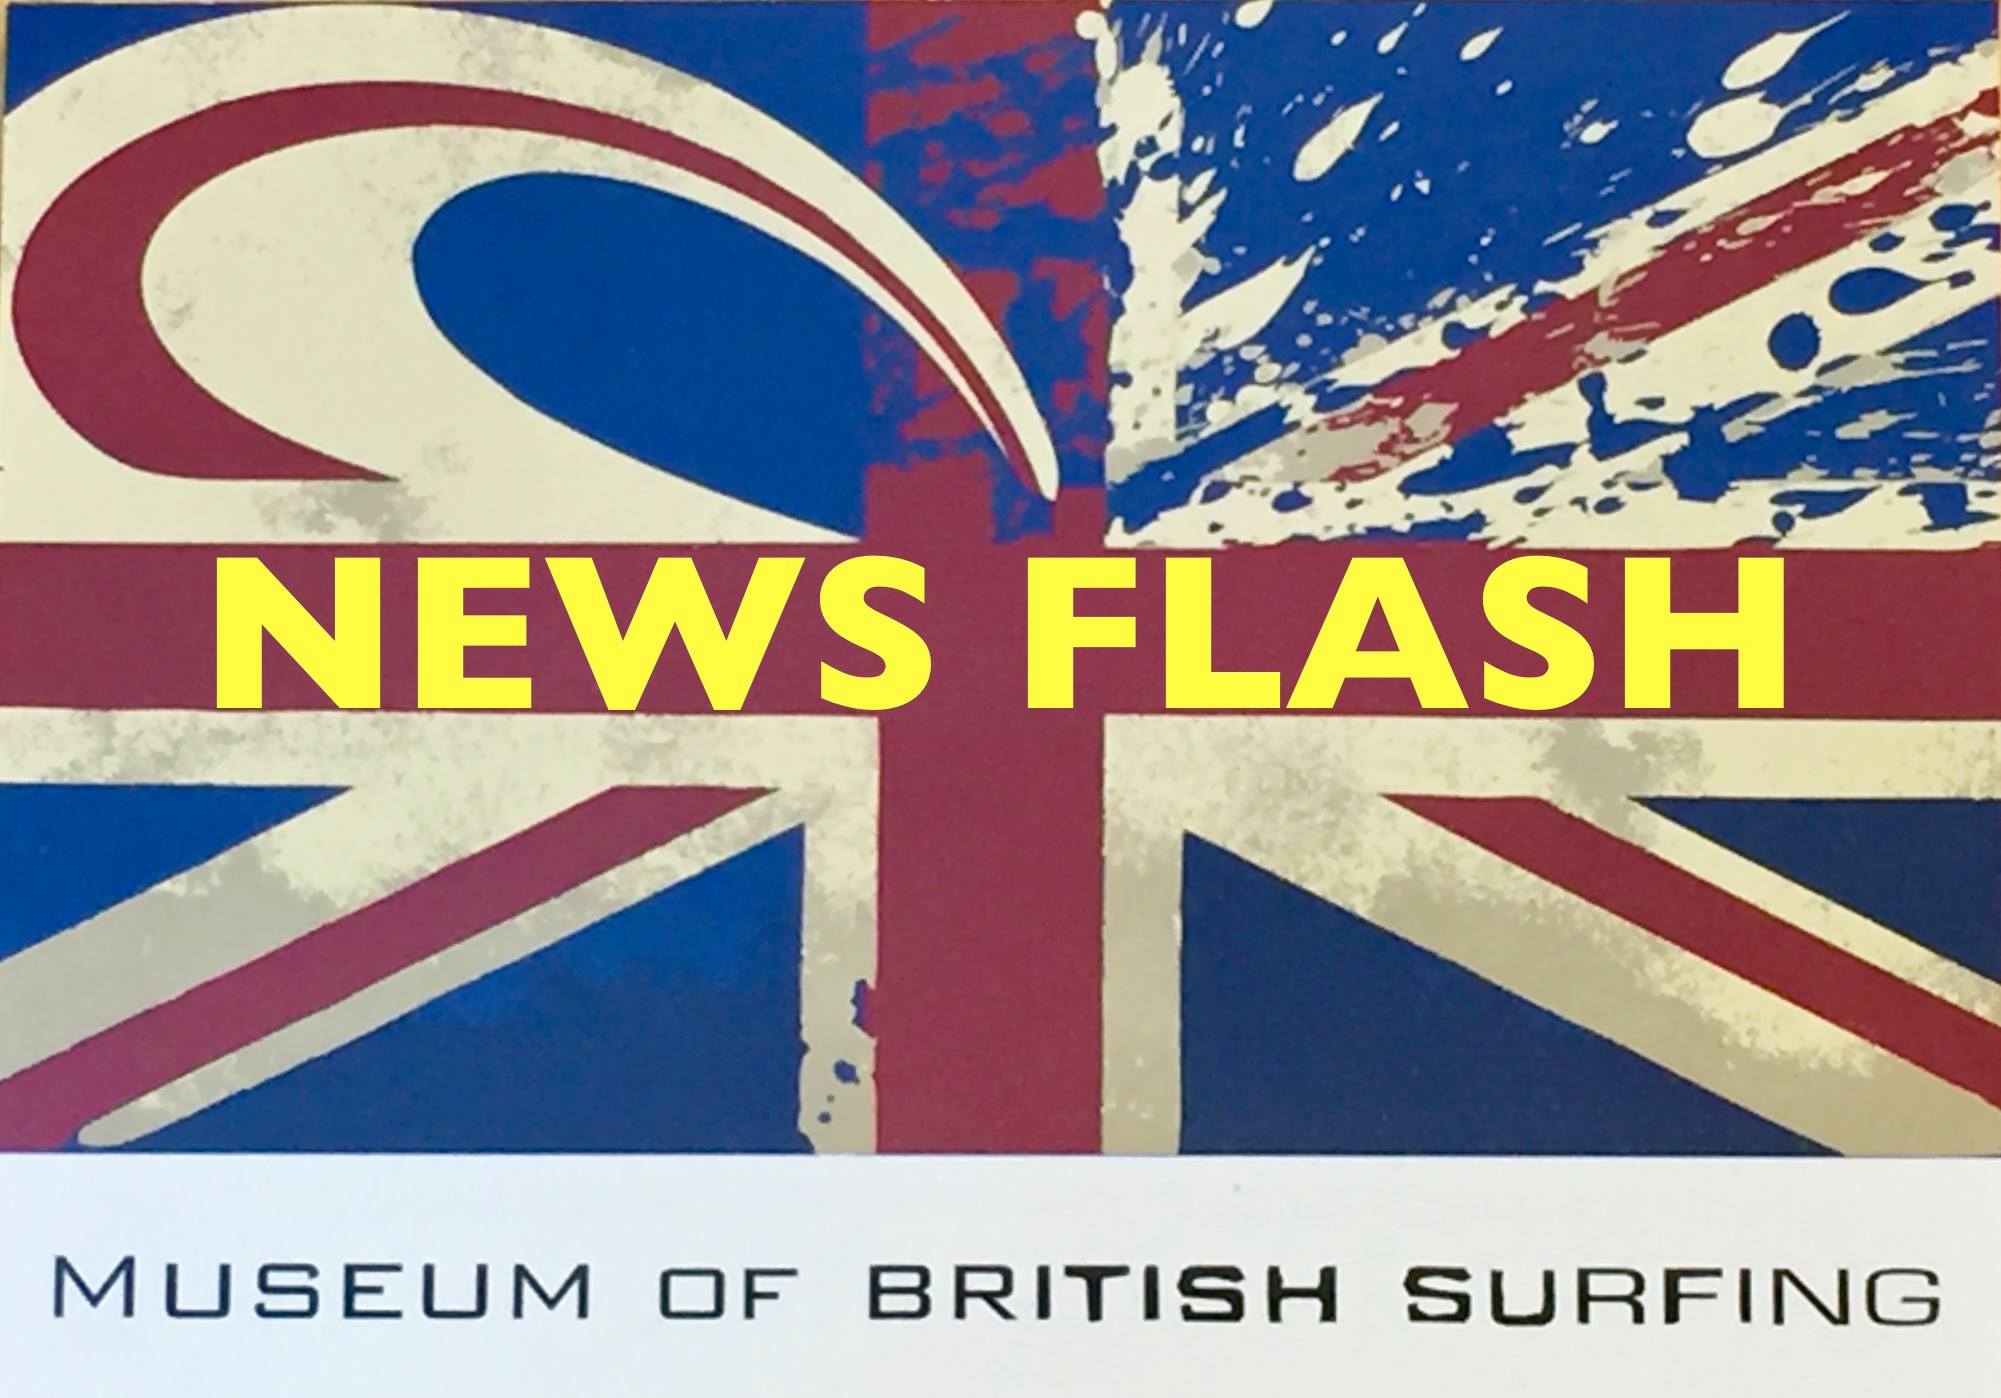 The Museum of British Surfing receives full accreditation!